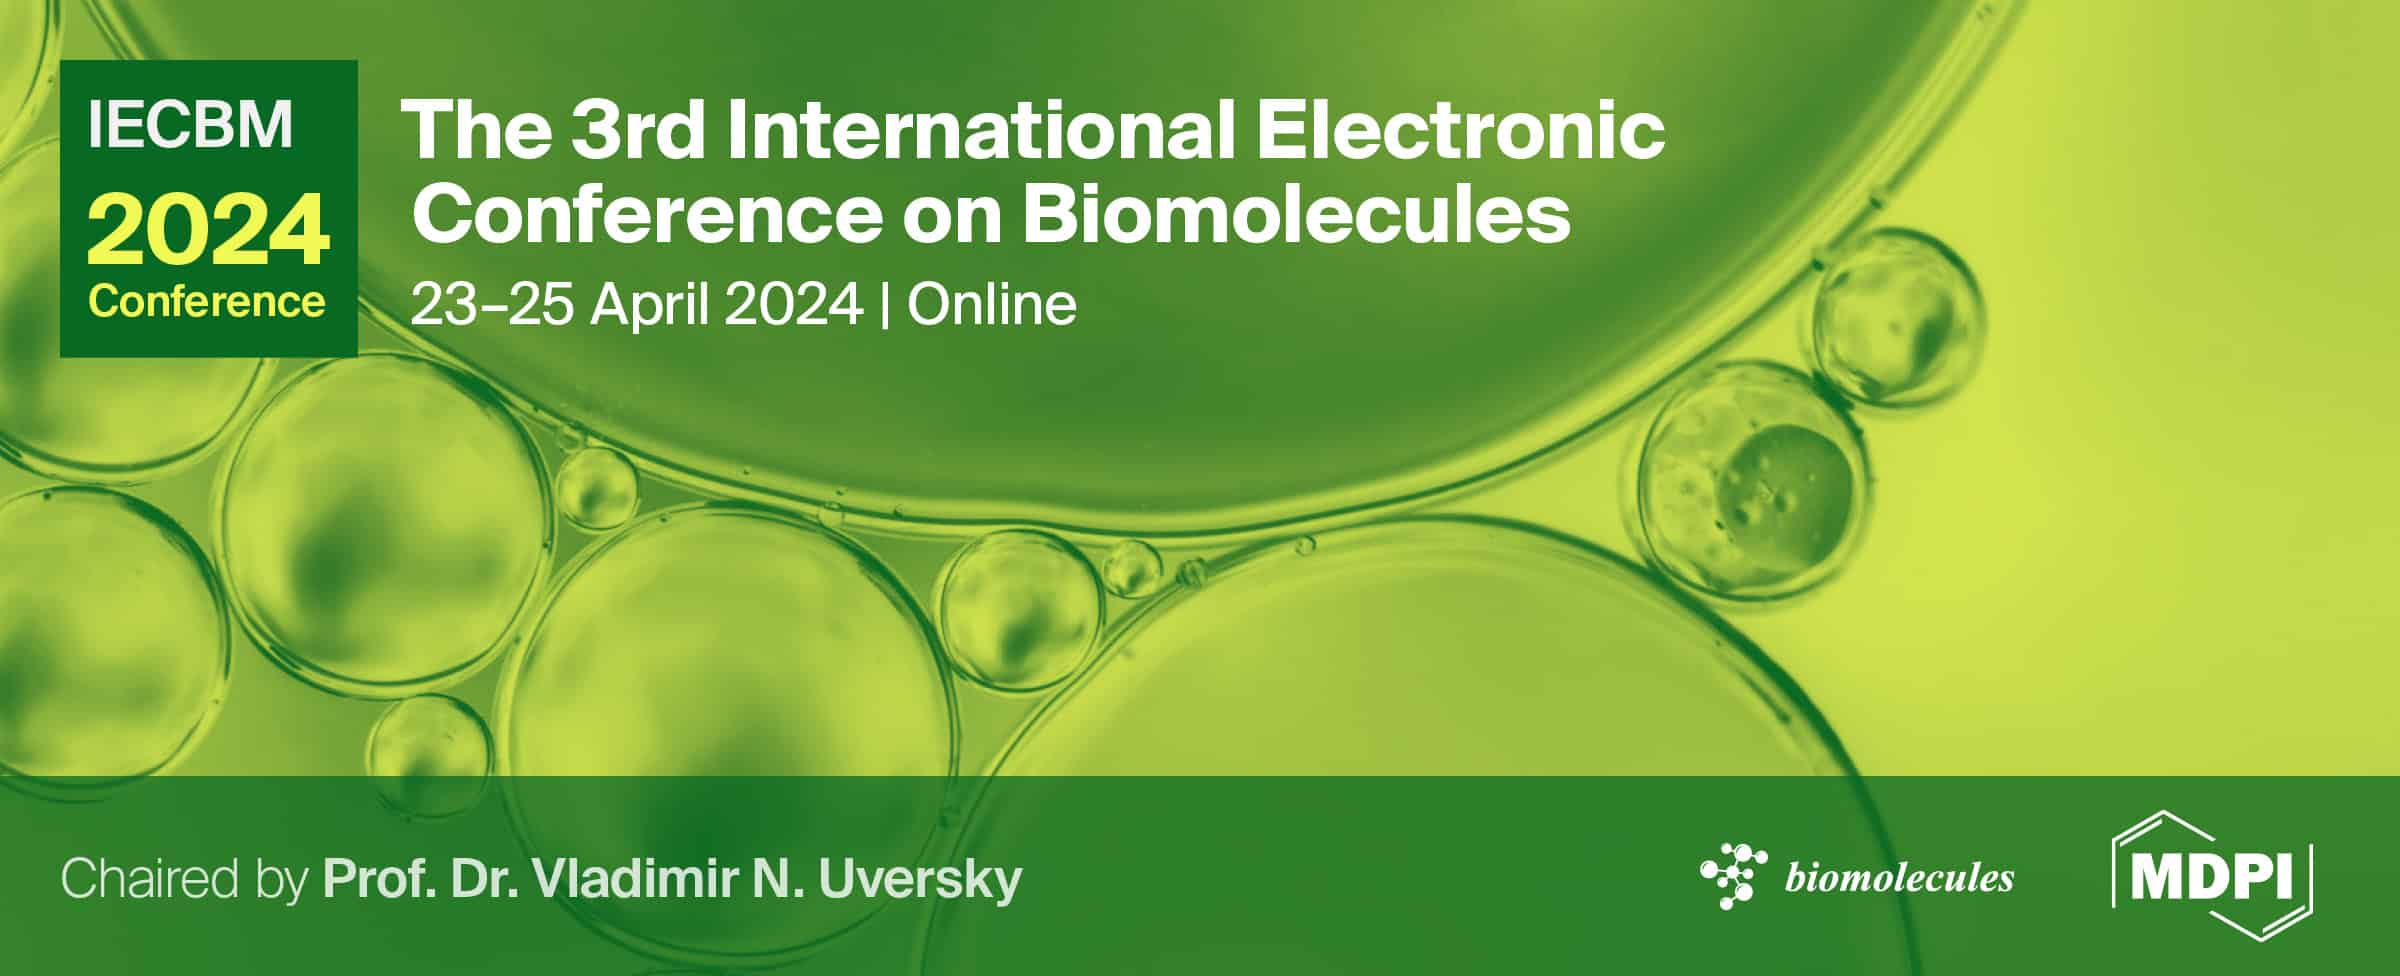 The 3rd International Electronic Conference on Biomolecules